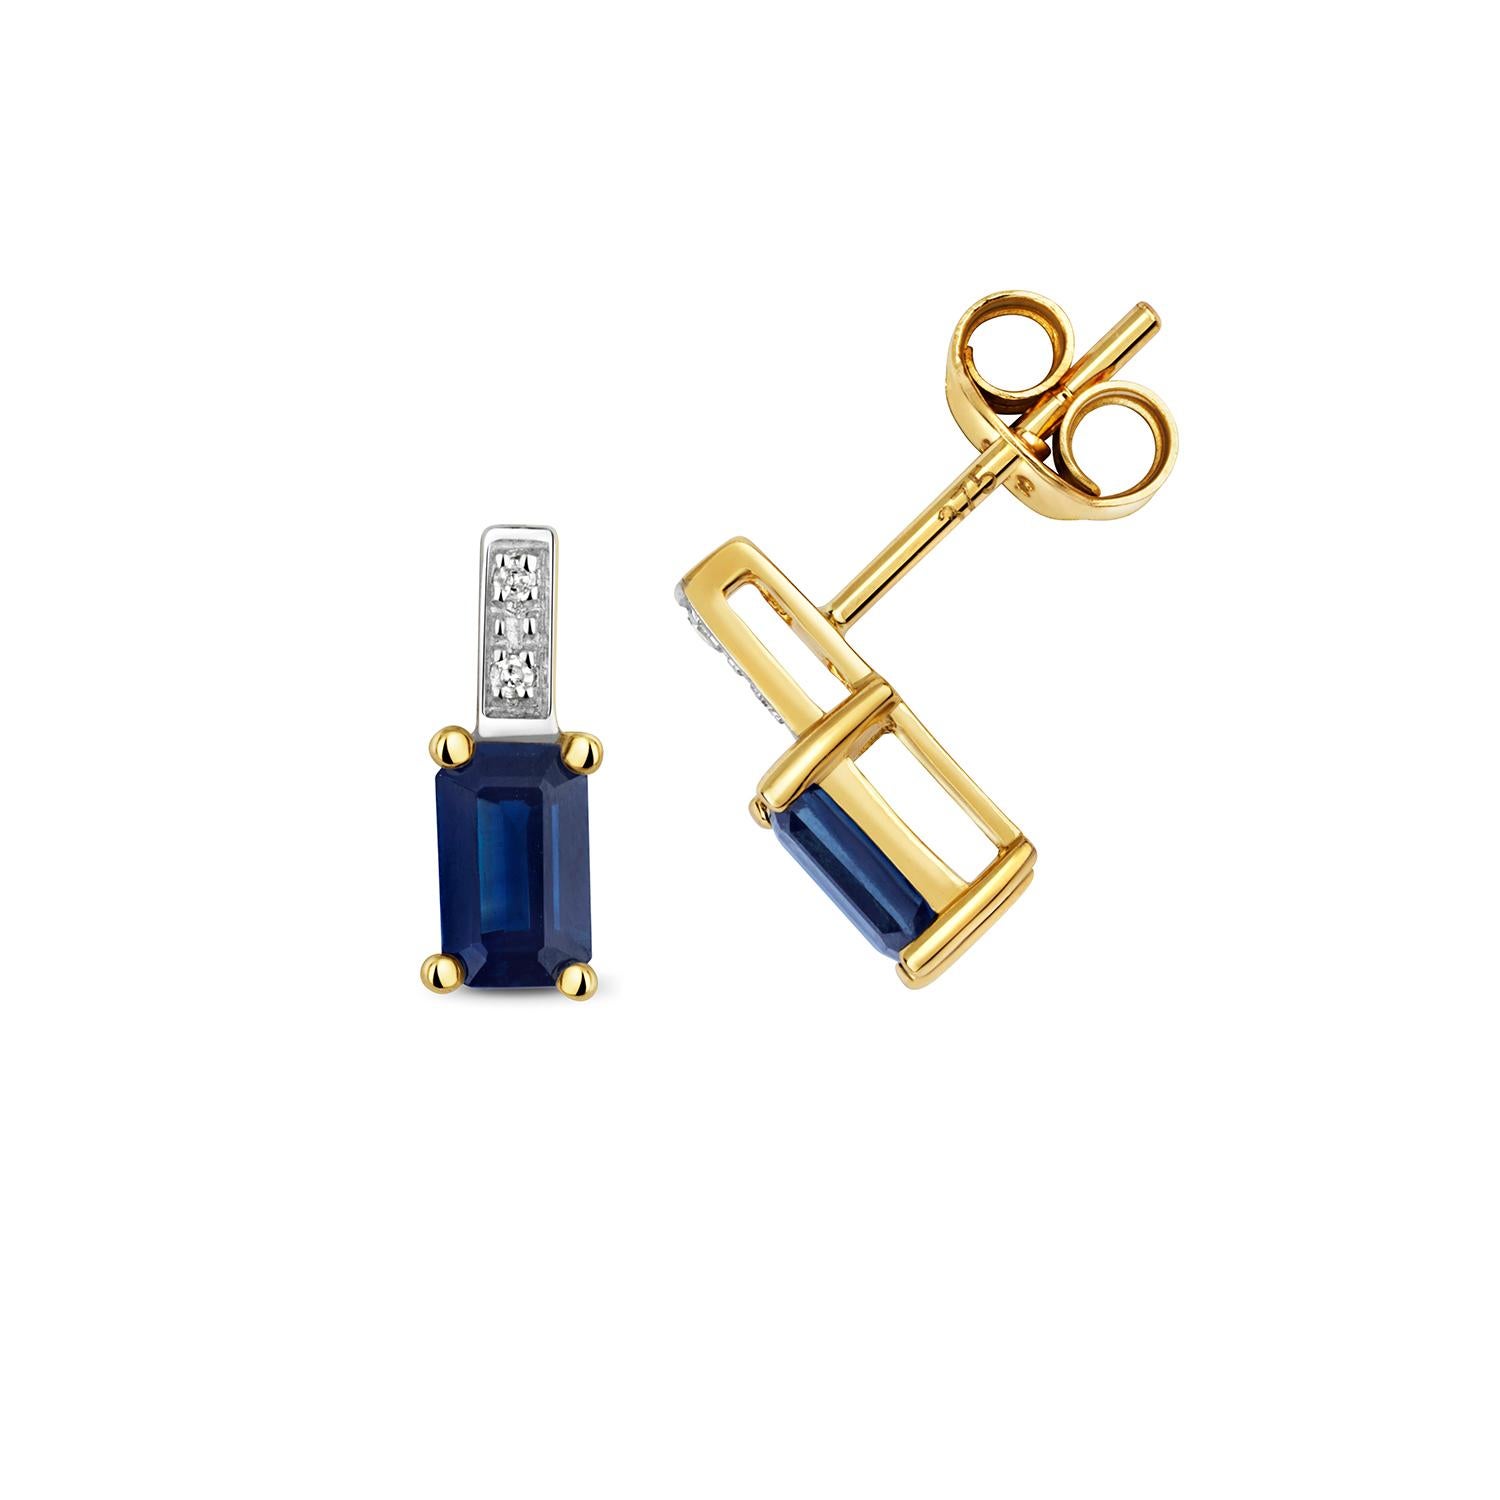 DIAMOND AND SAPPHIRE EARRINGS

9CT W/G SC/0.01 SAP/0.60CT

Weight: 0.82g